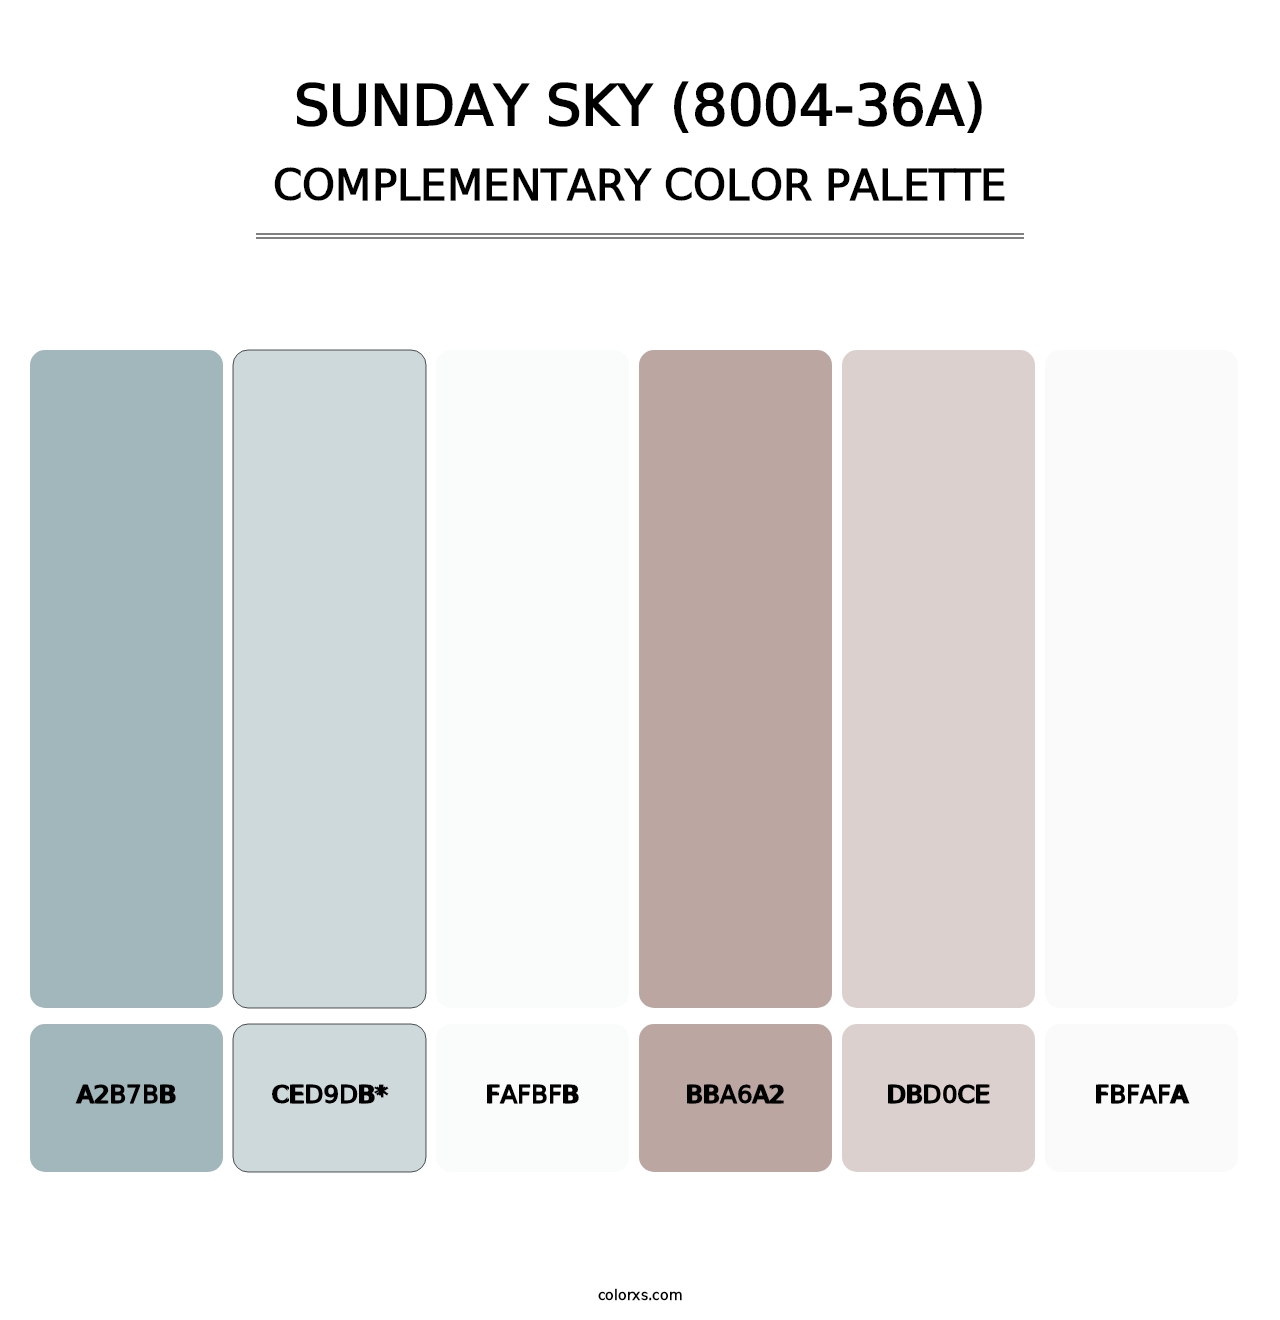 Sunday Sky (8004-36A) - Complementary Color Palette